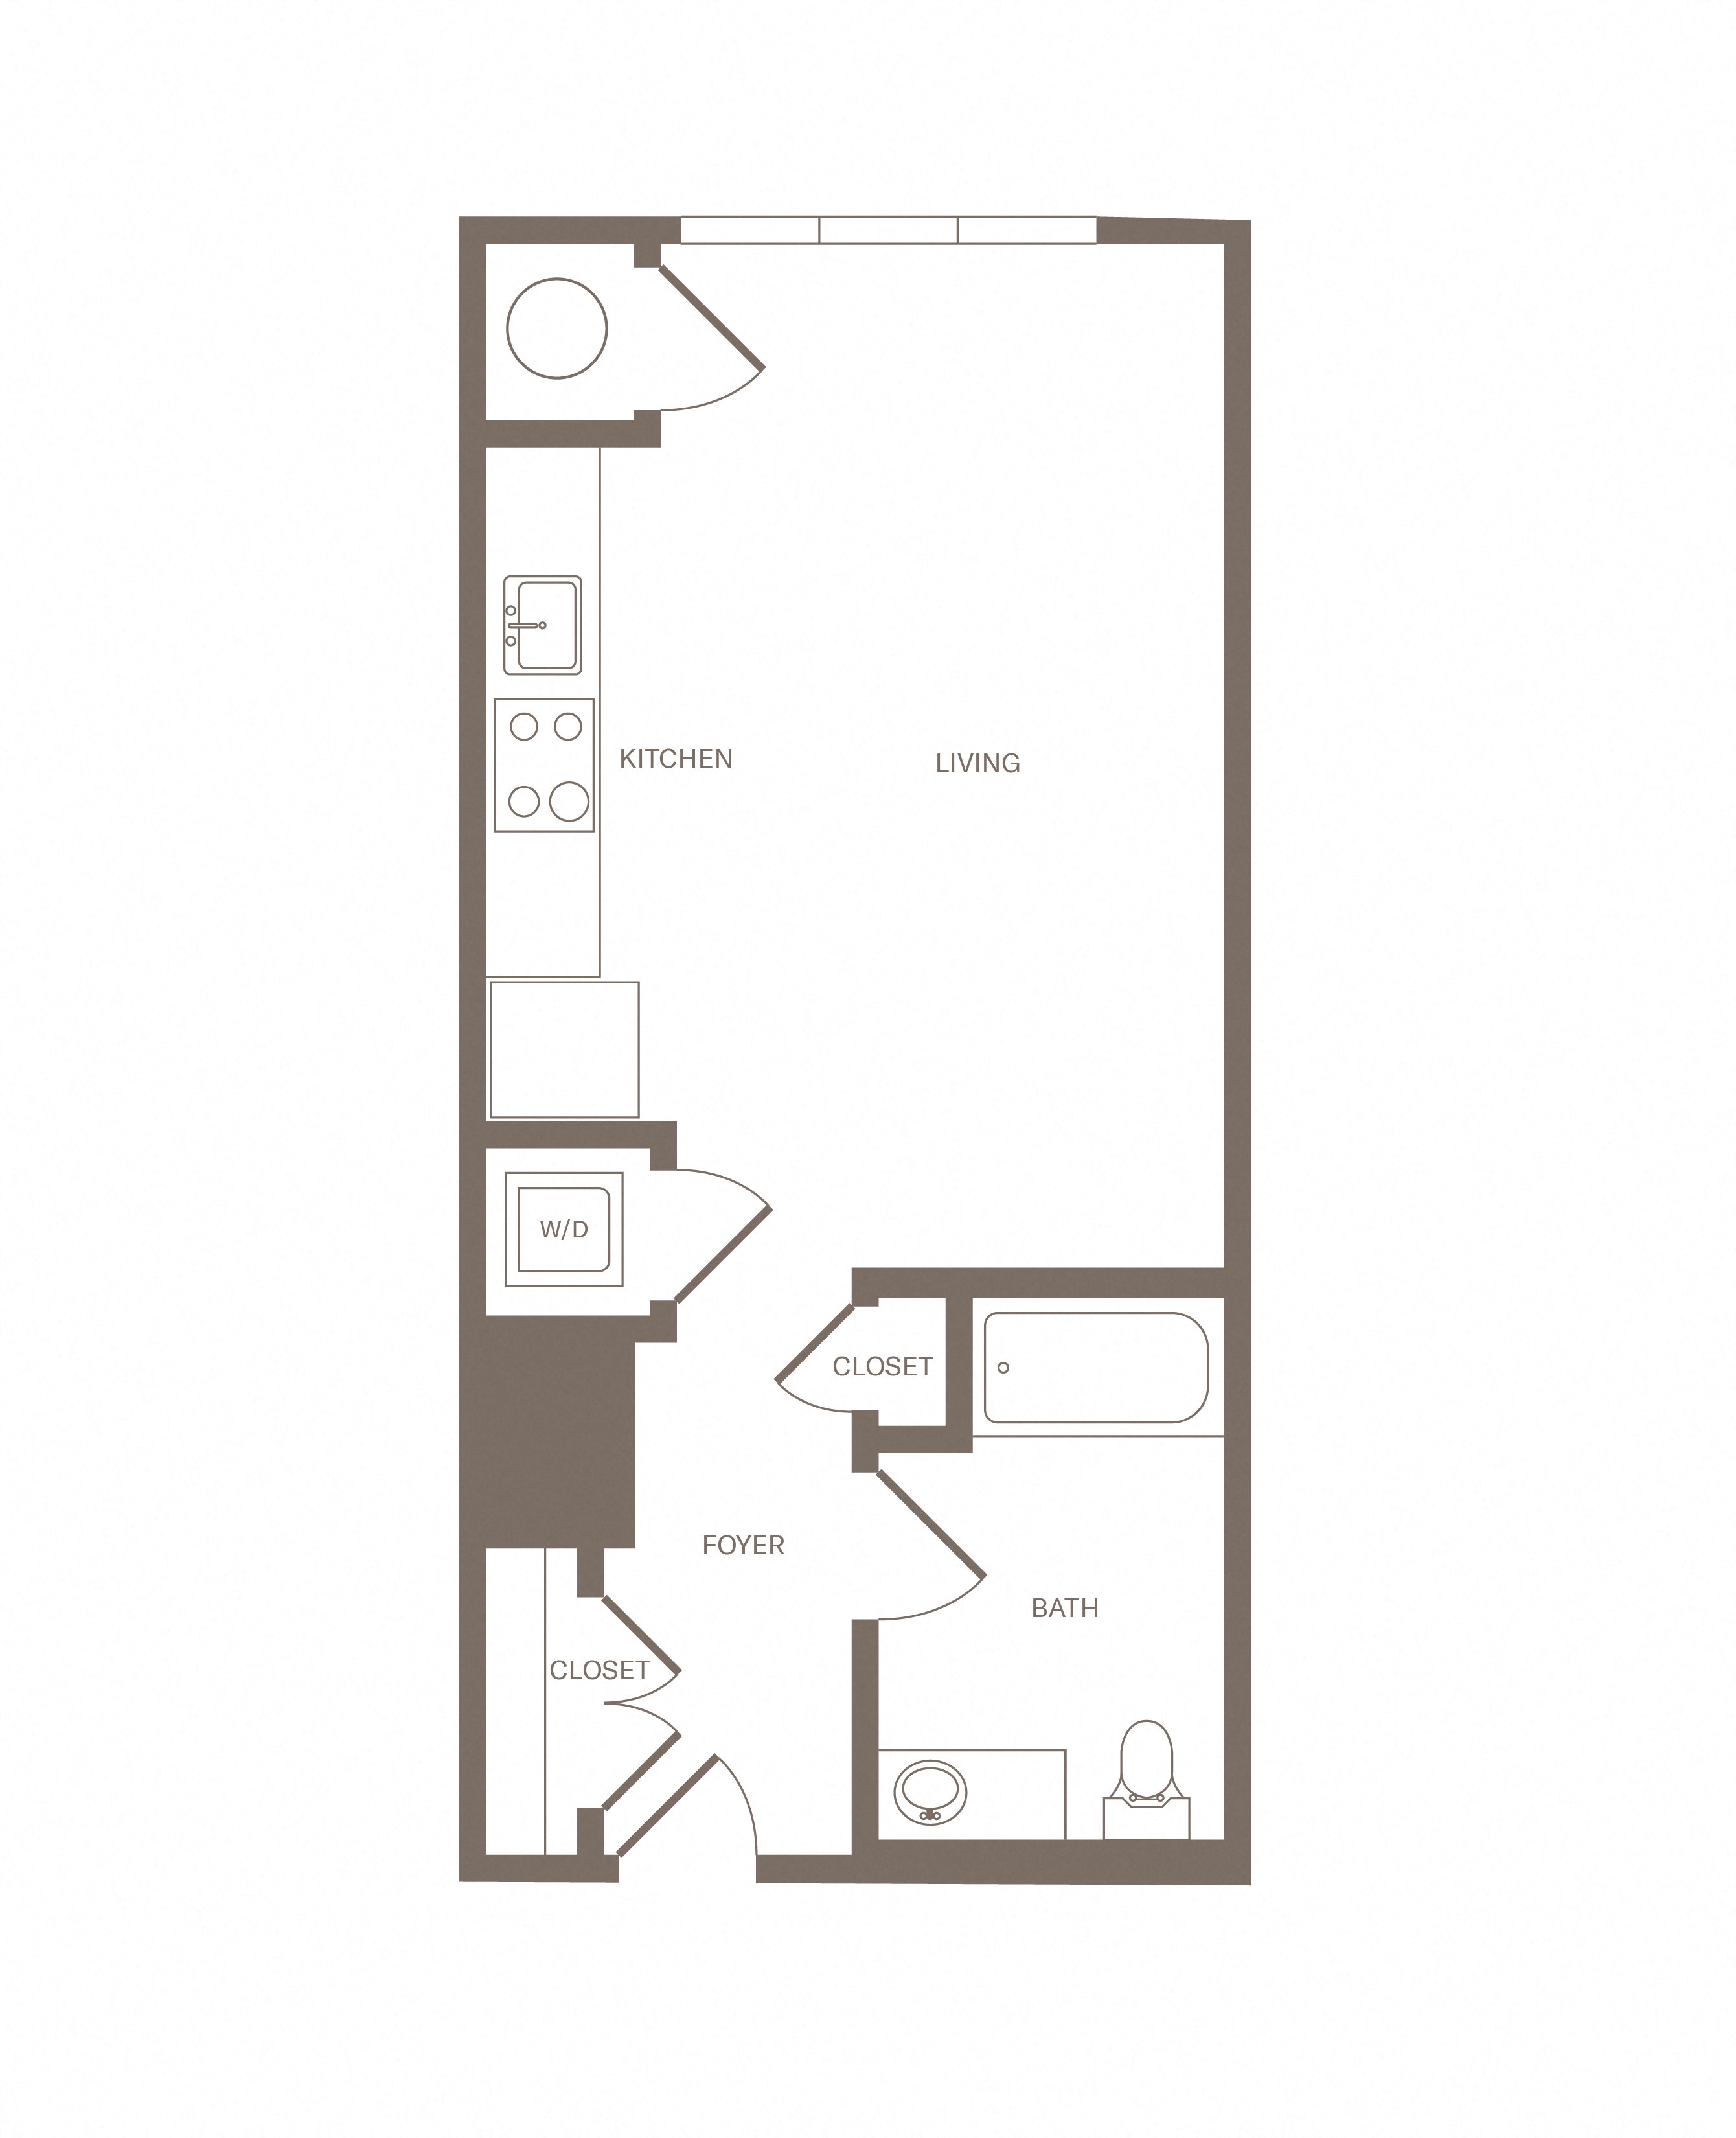 Floorplan for Apartment #1306, 0 bedroom unit at Halstead Parsippany